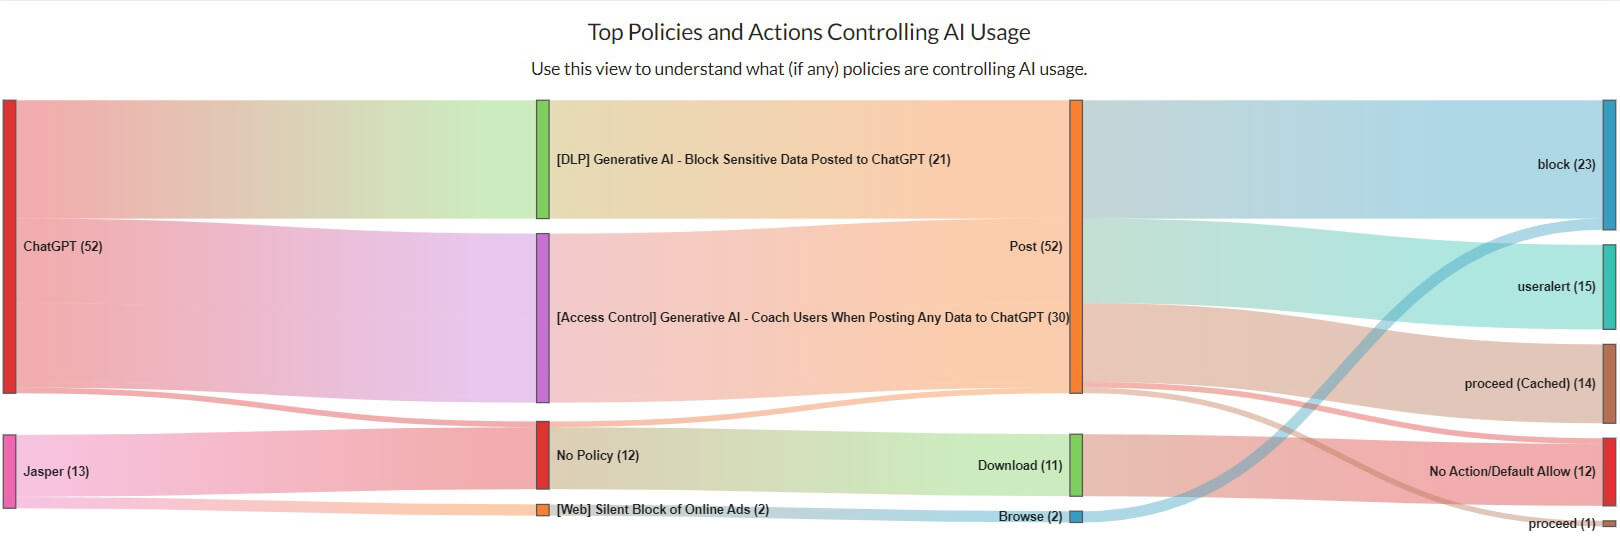 Top Policies and Actions Controlling AI Usage - Netskope Advanced Analytics